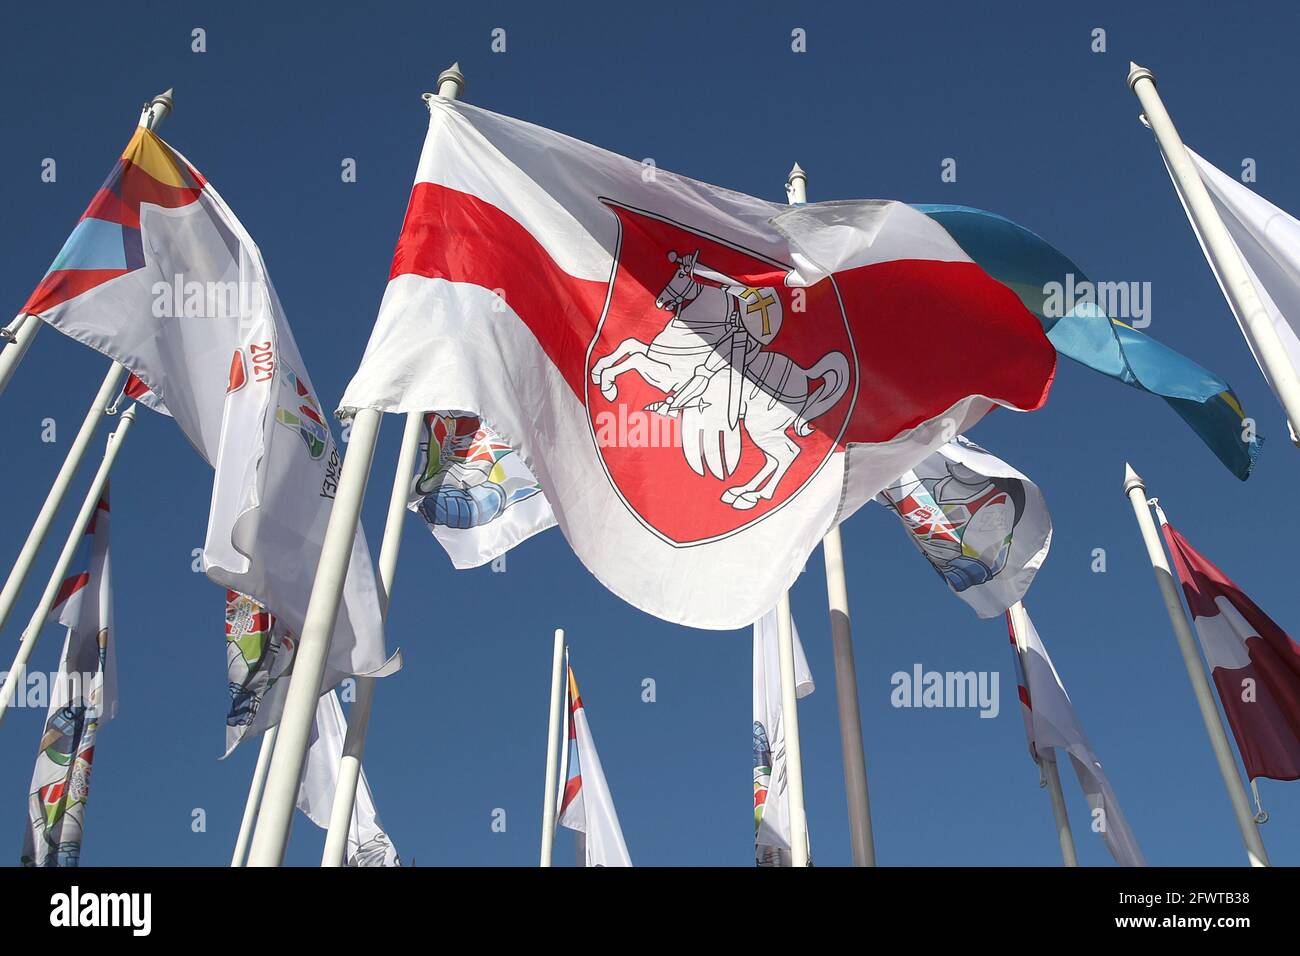 RIGA, LATVIA - MAY 24, 2021: A white-red-white flag (C) waves outside the Radisson  Blu Hotel Latvija in central Riga where participants in the 2021 IIHF World  Championship live. The Belarusian flag